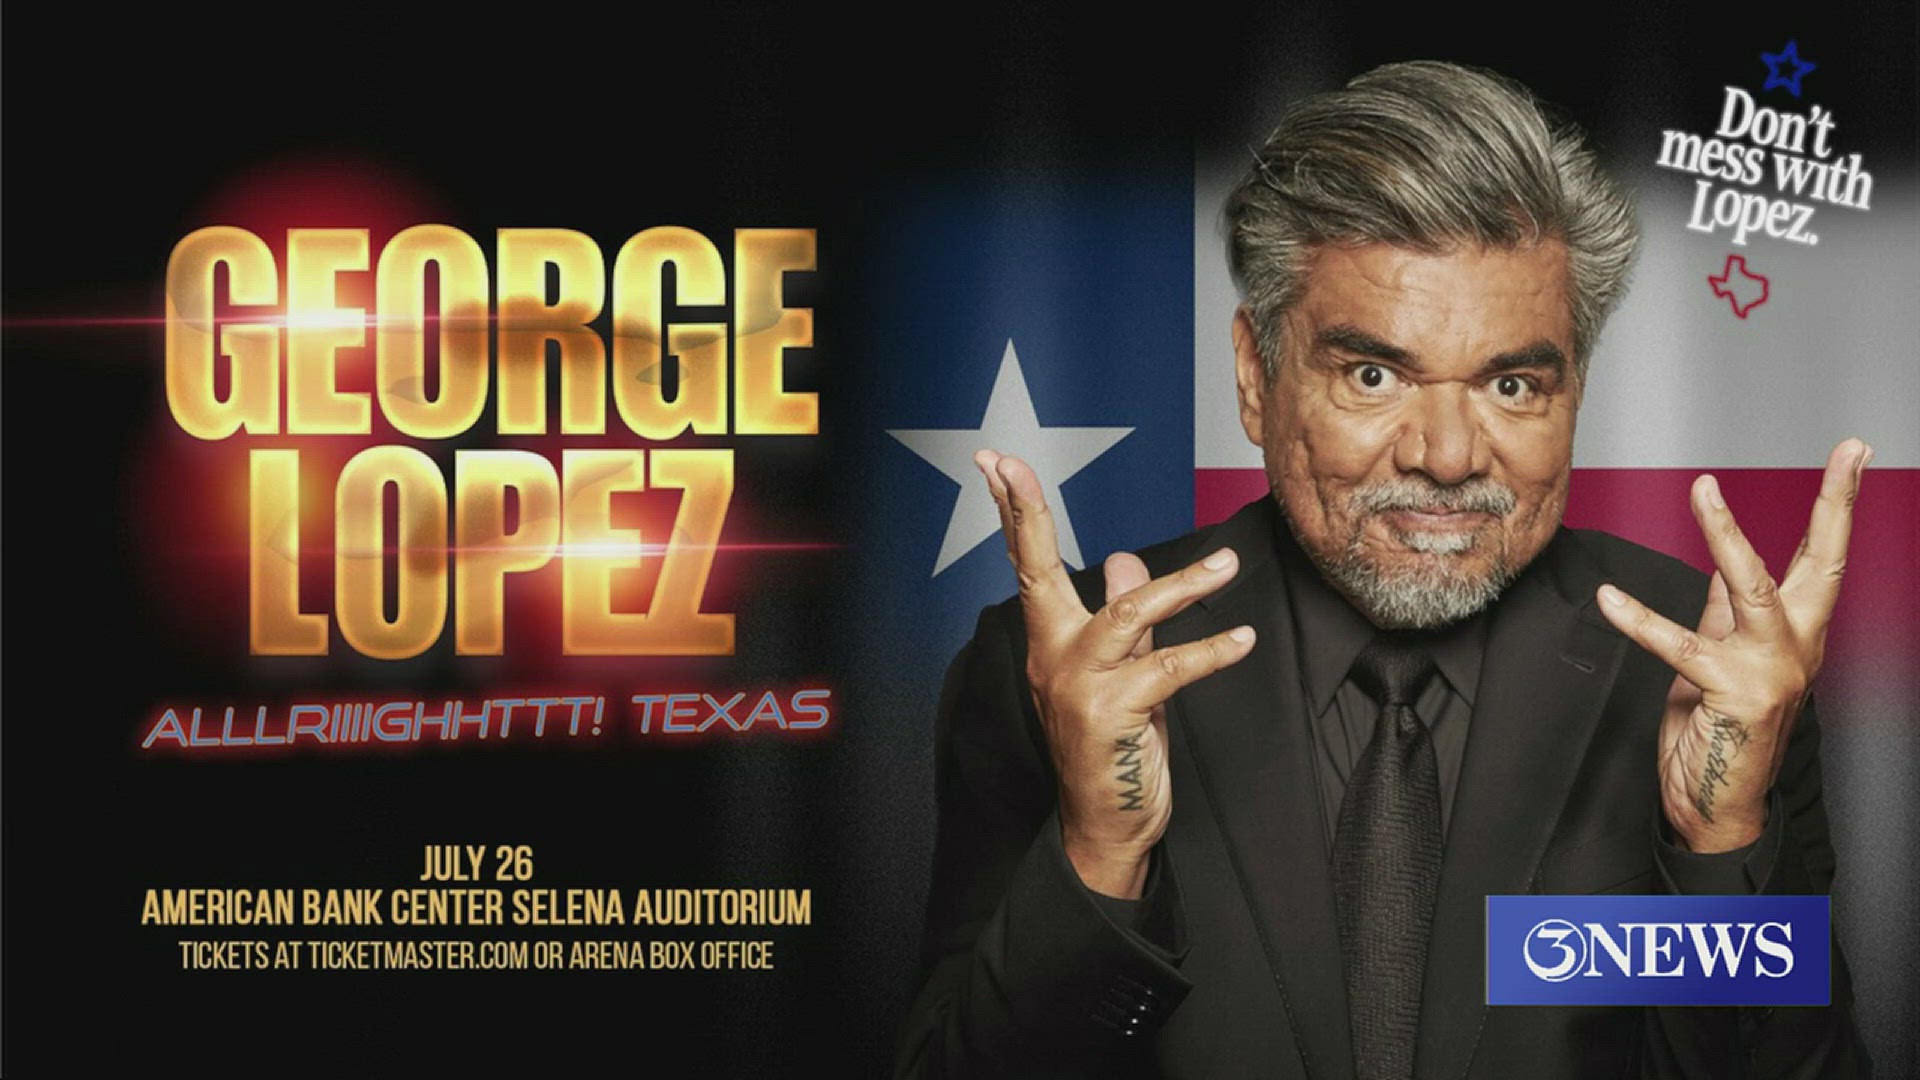 Presale tickets will go on sale Tuesday with the code "alright" at georgelopez.com